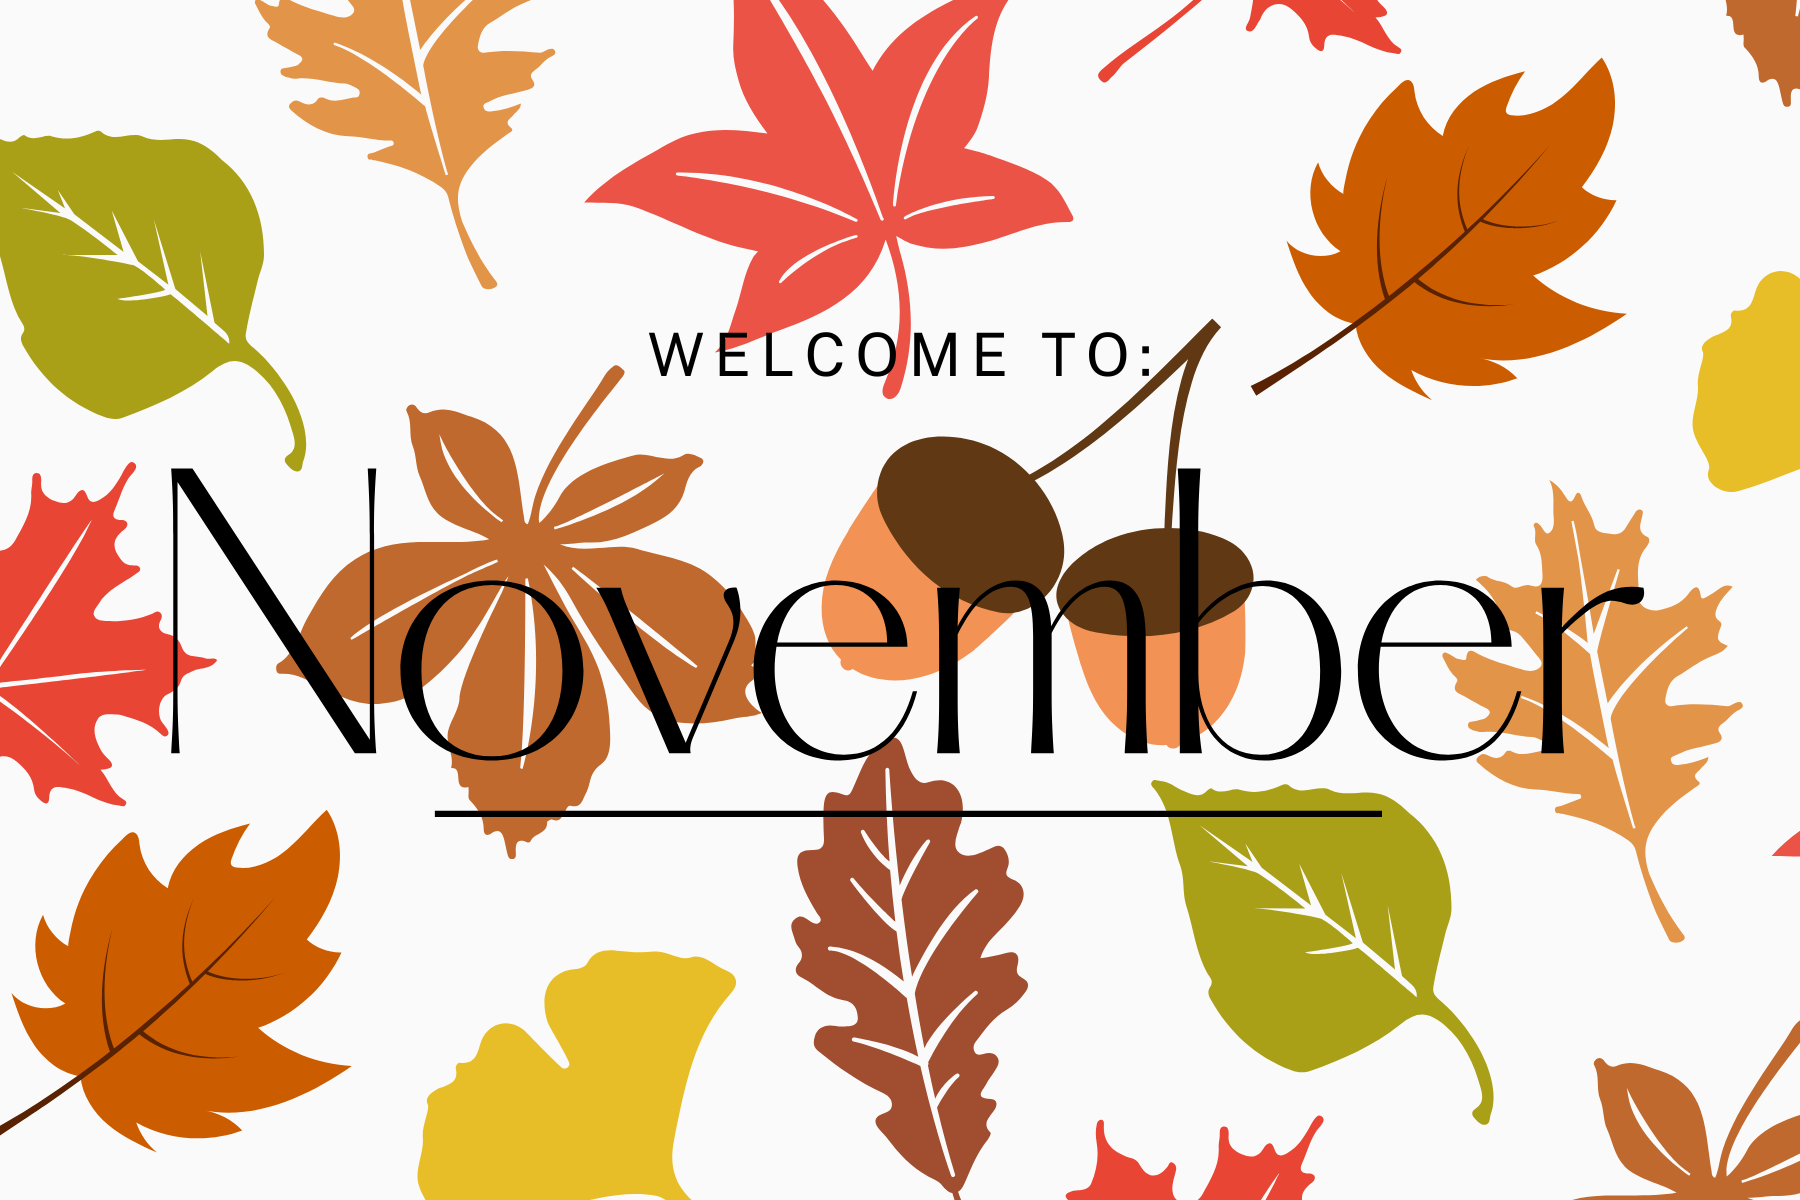 Welcome to November